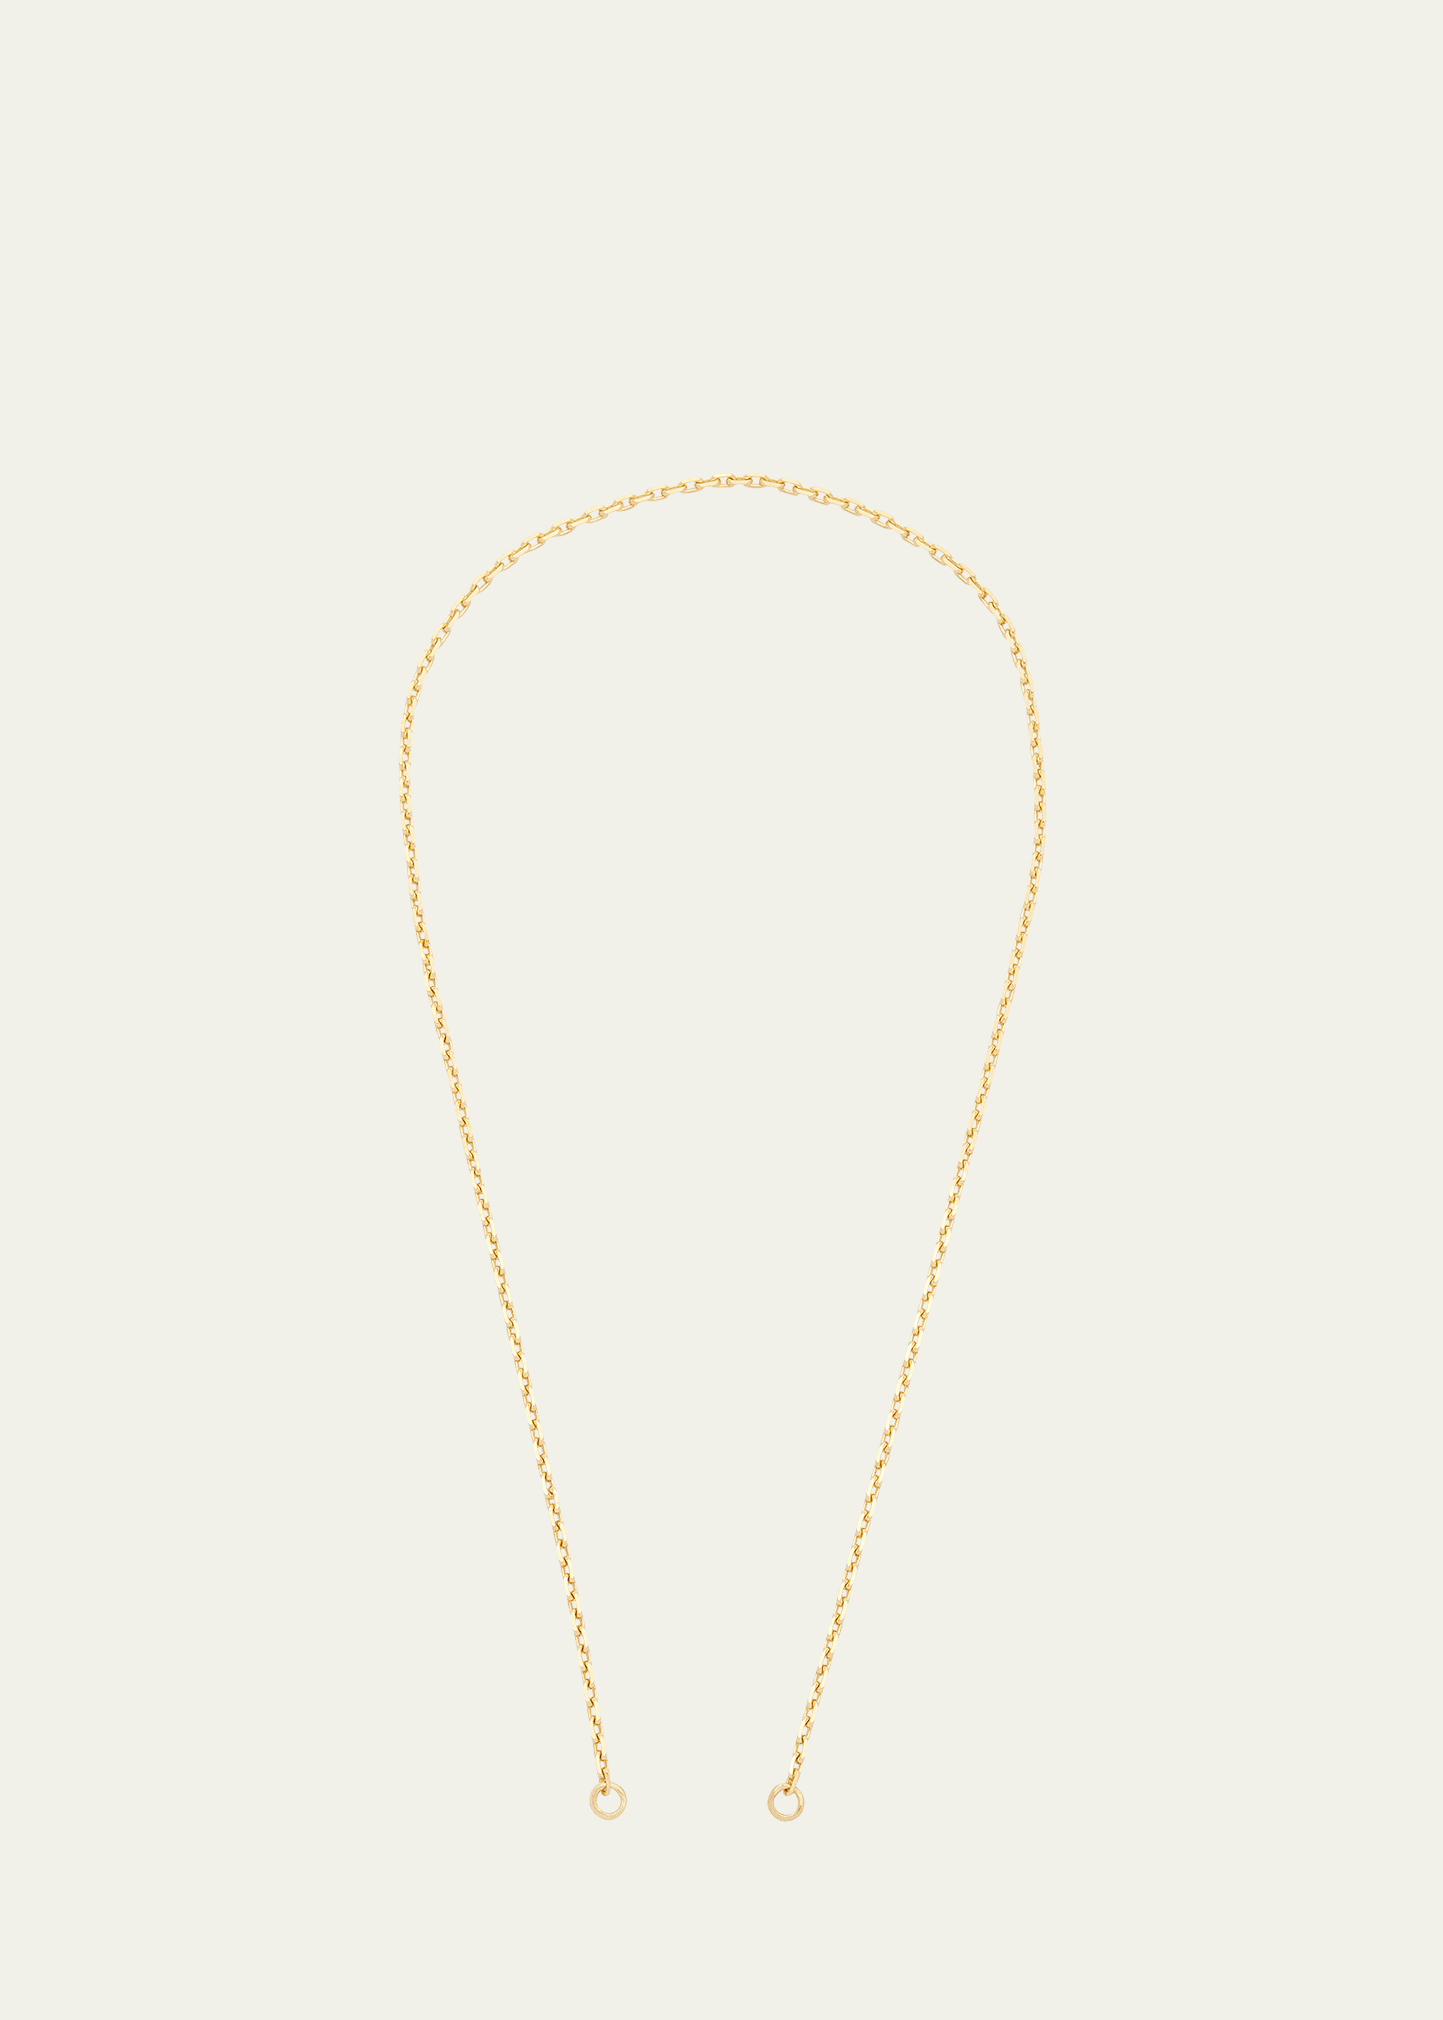 Anchor Chain With Solid 18k Yellow Gold, 18"L